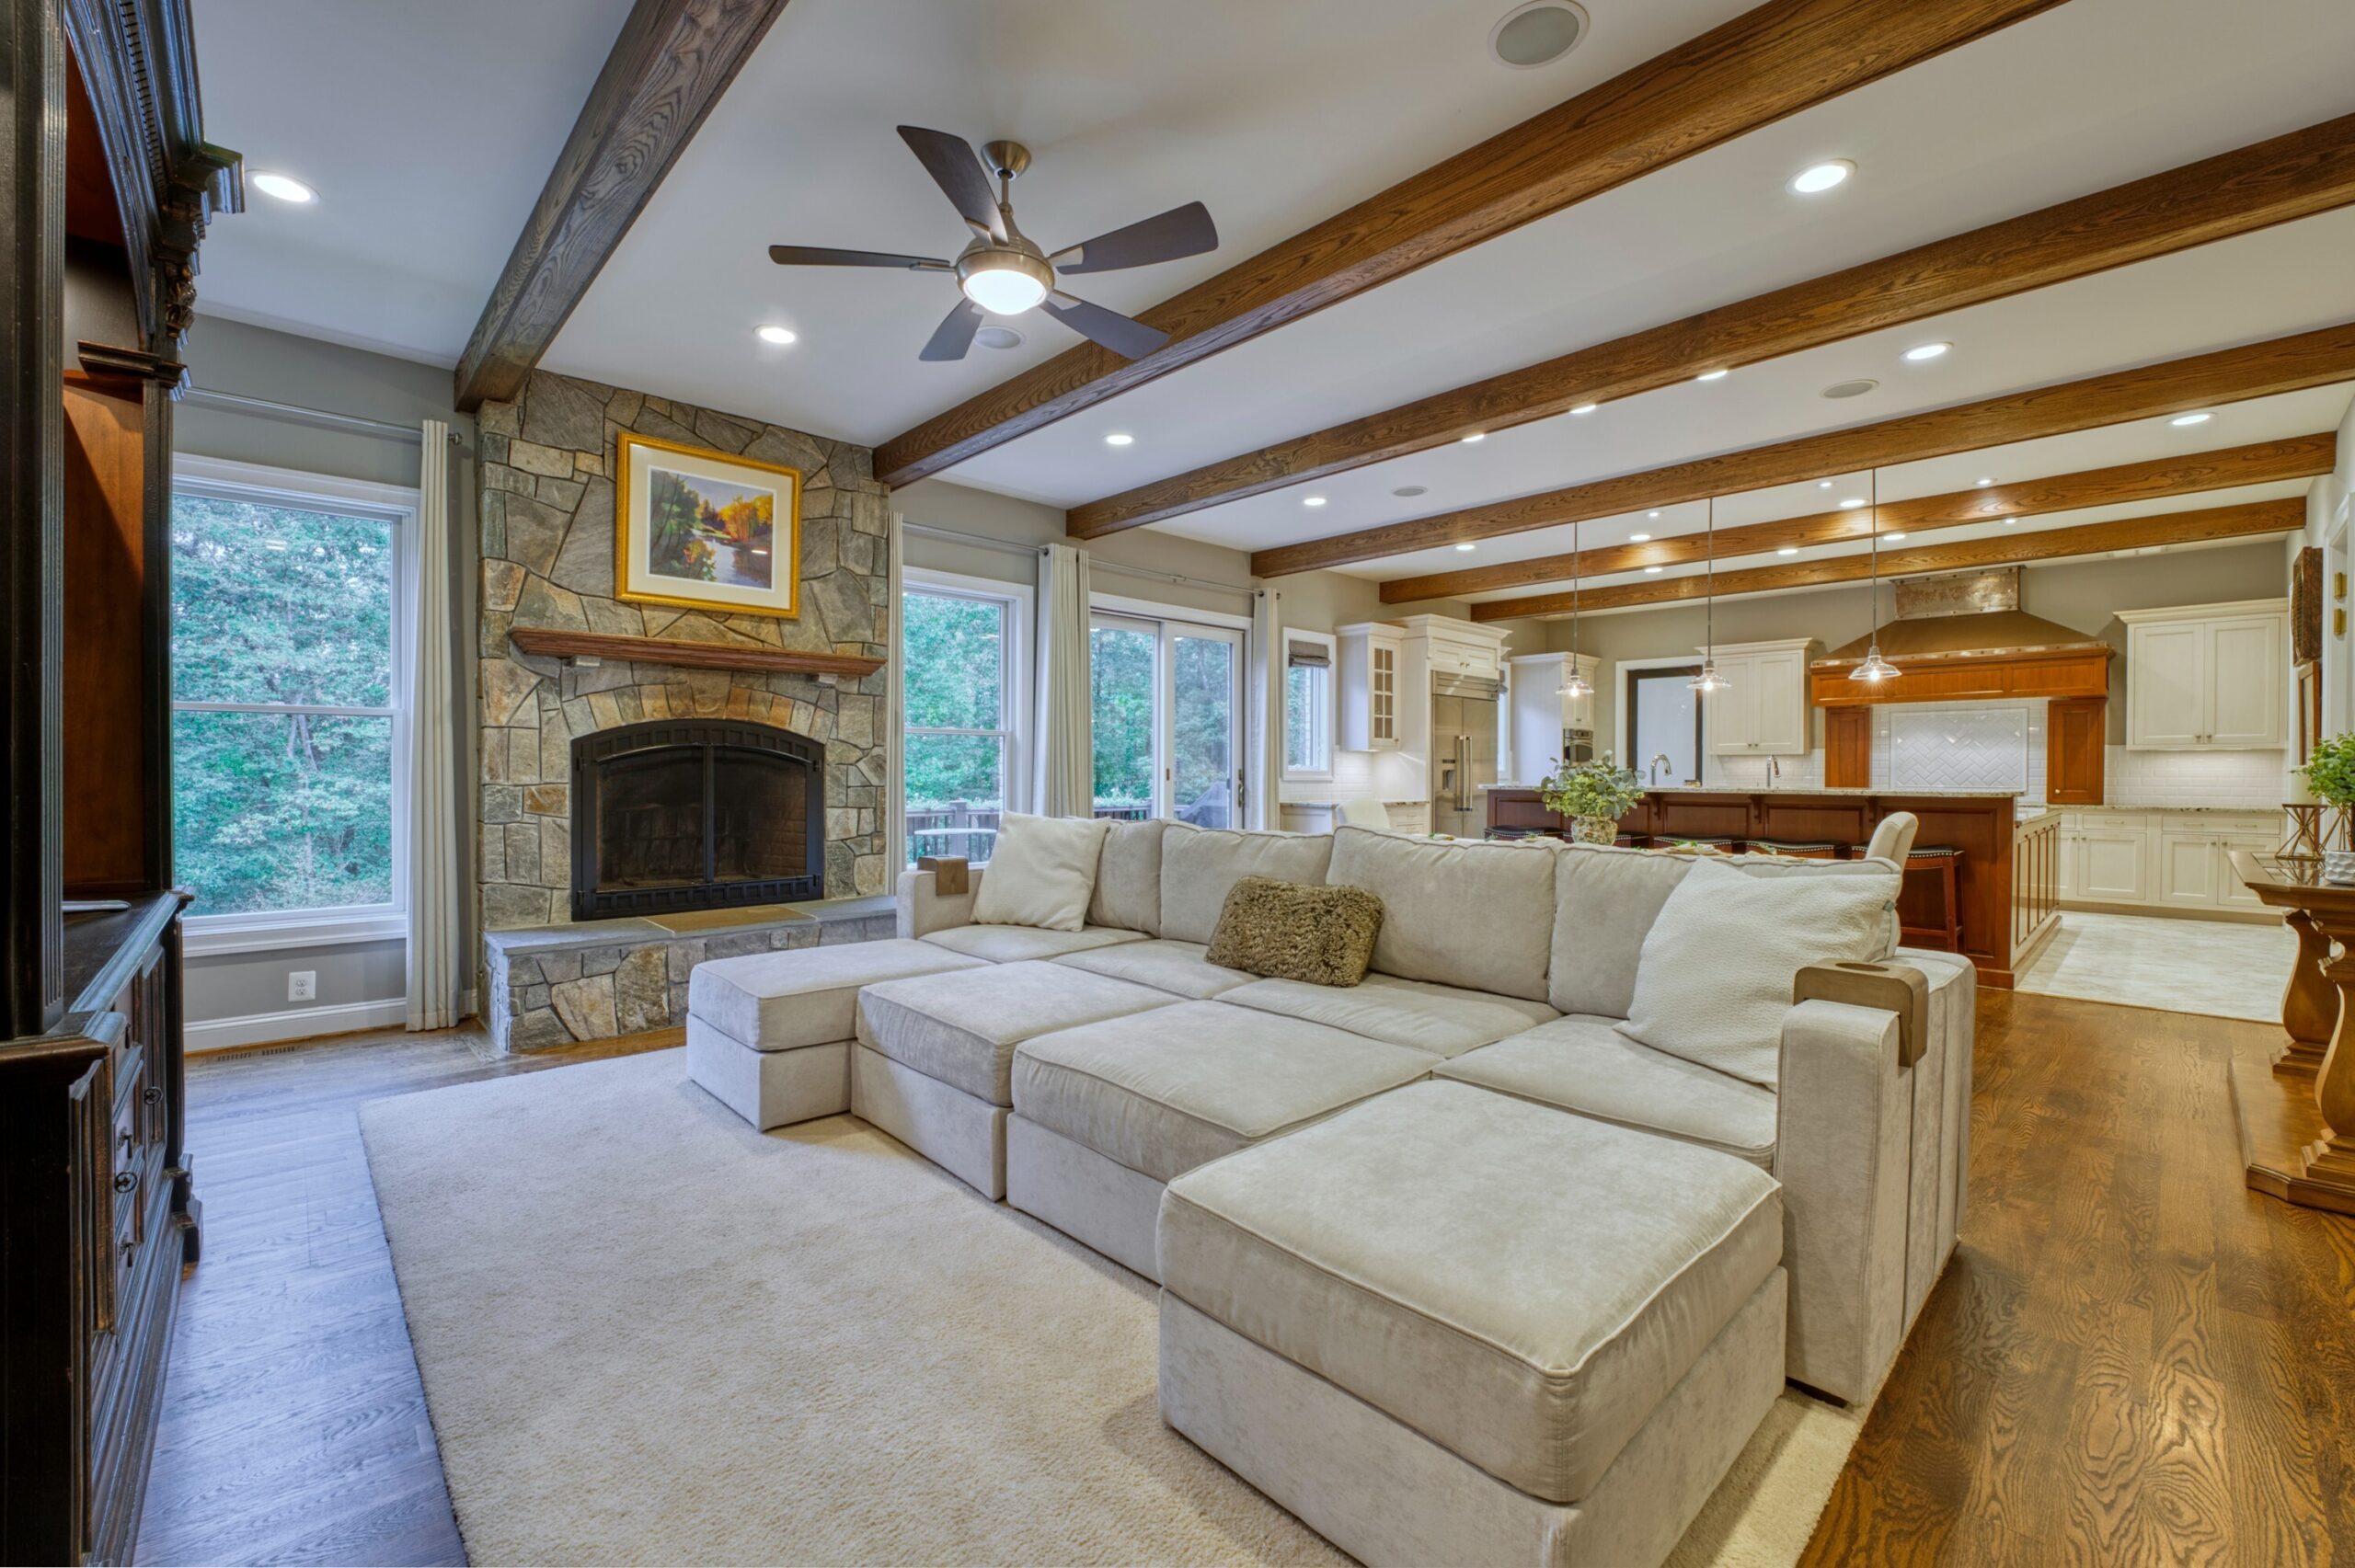 Professional interior photo of 40046 Mount Gilead Rd in Leesburg, Virginia - showing the living room open to the kitchen with large exposed beams in the otherwise white ceiling. There is a stone fireplace against the back wall